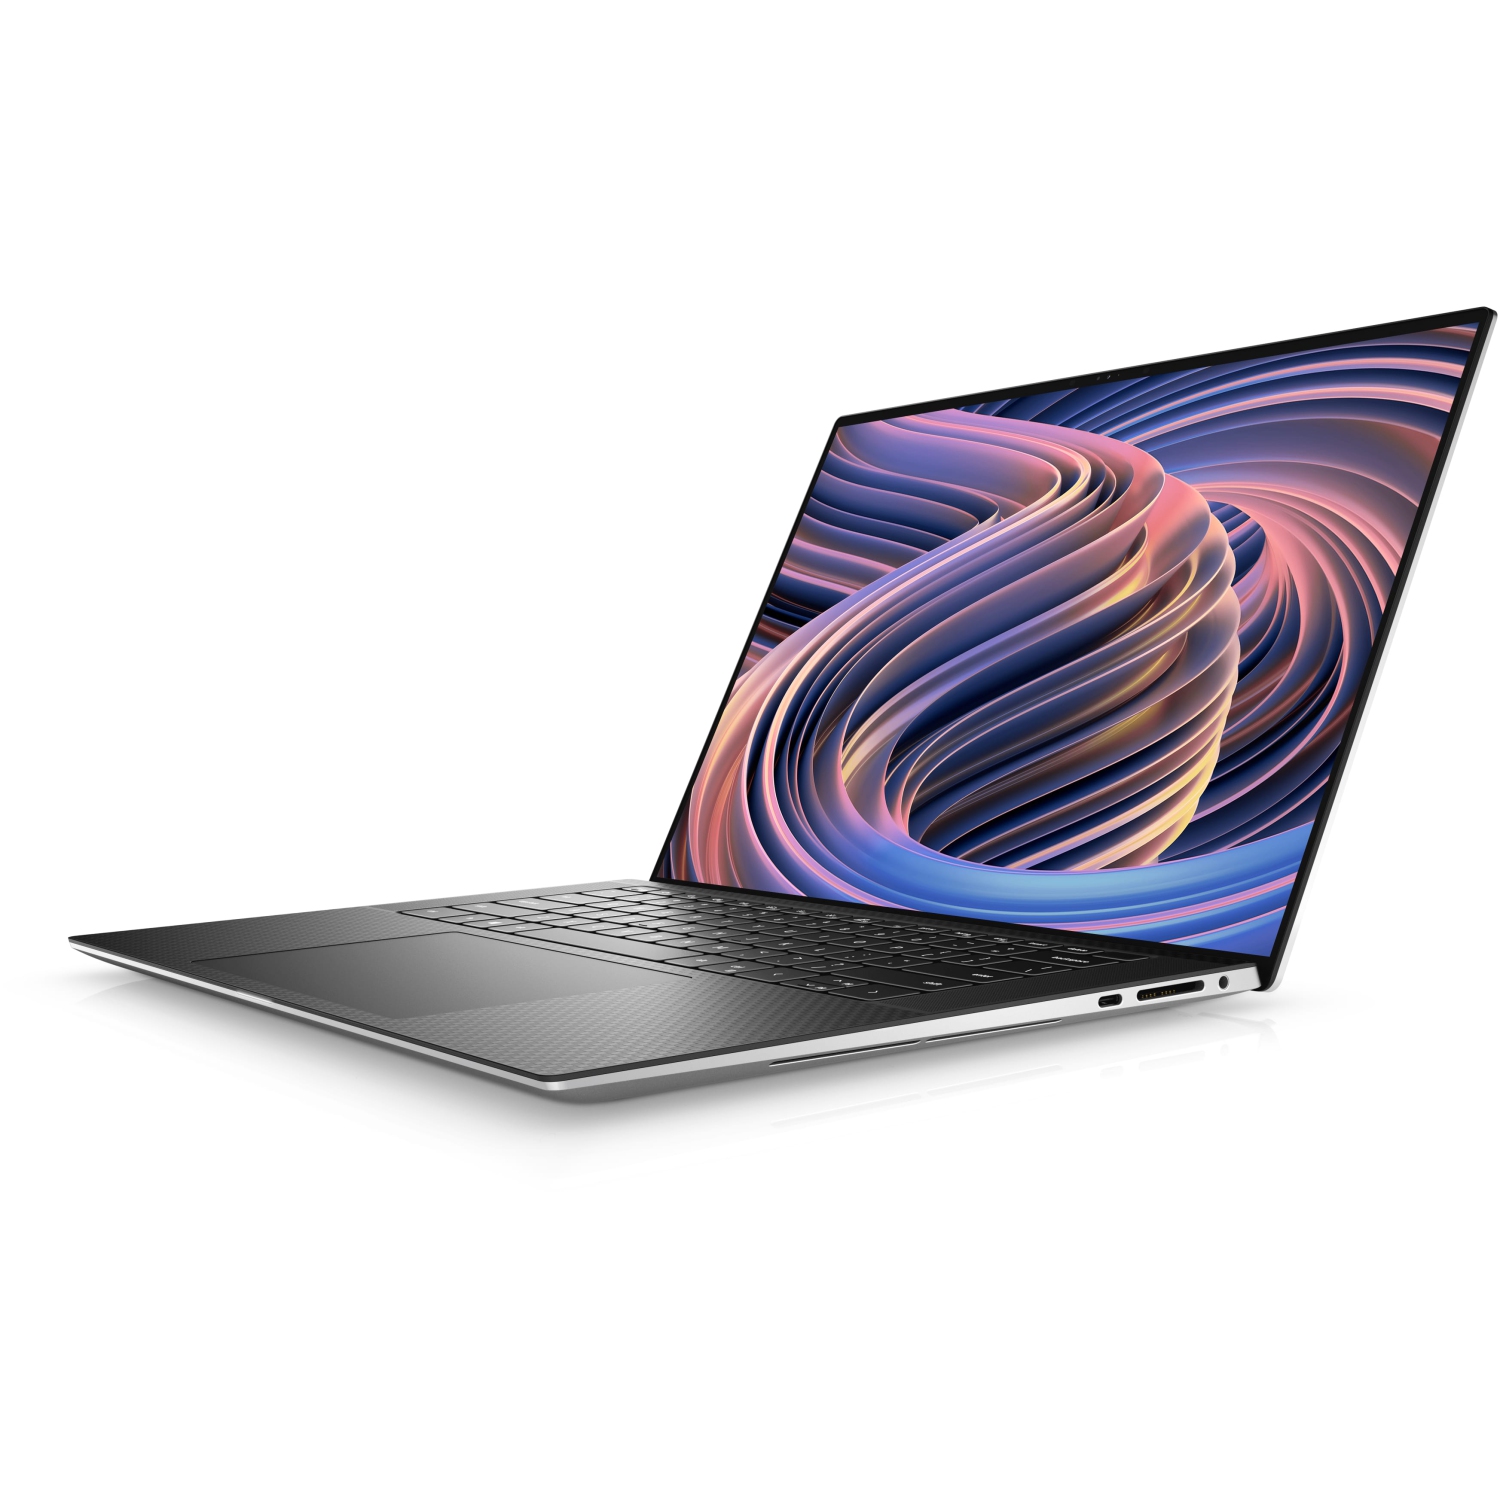 Refurbished (Excellent) – Dell XPS 9520 Laptop (2022) | 15.6" FHD+ | Core i7 - 2TB SSD - 16GB RAM - RTX 3050 | 14 Cores @ 4.7 GHz - 12th Gen CPU